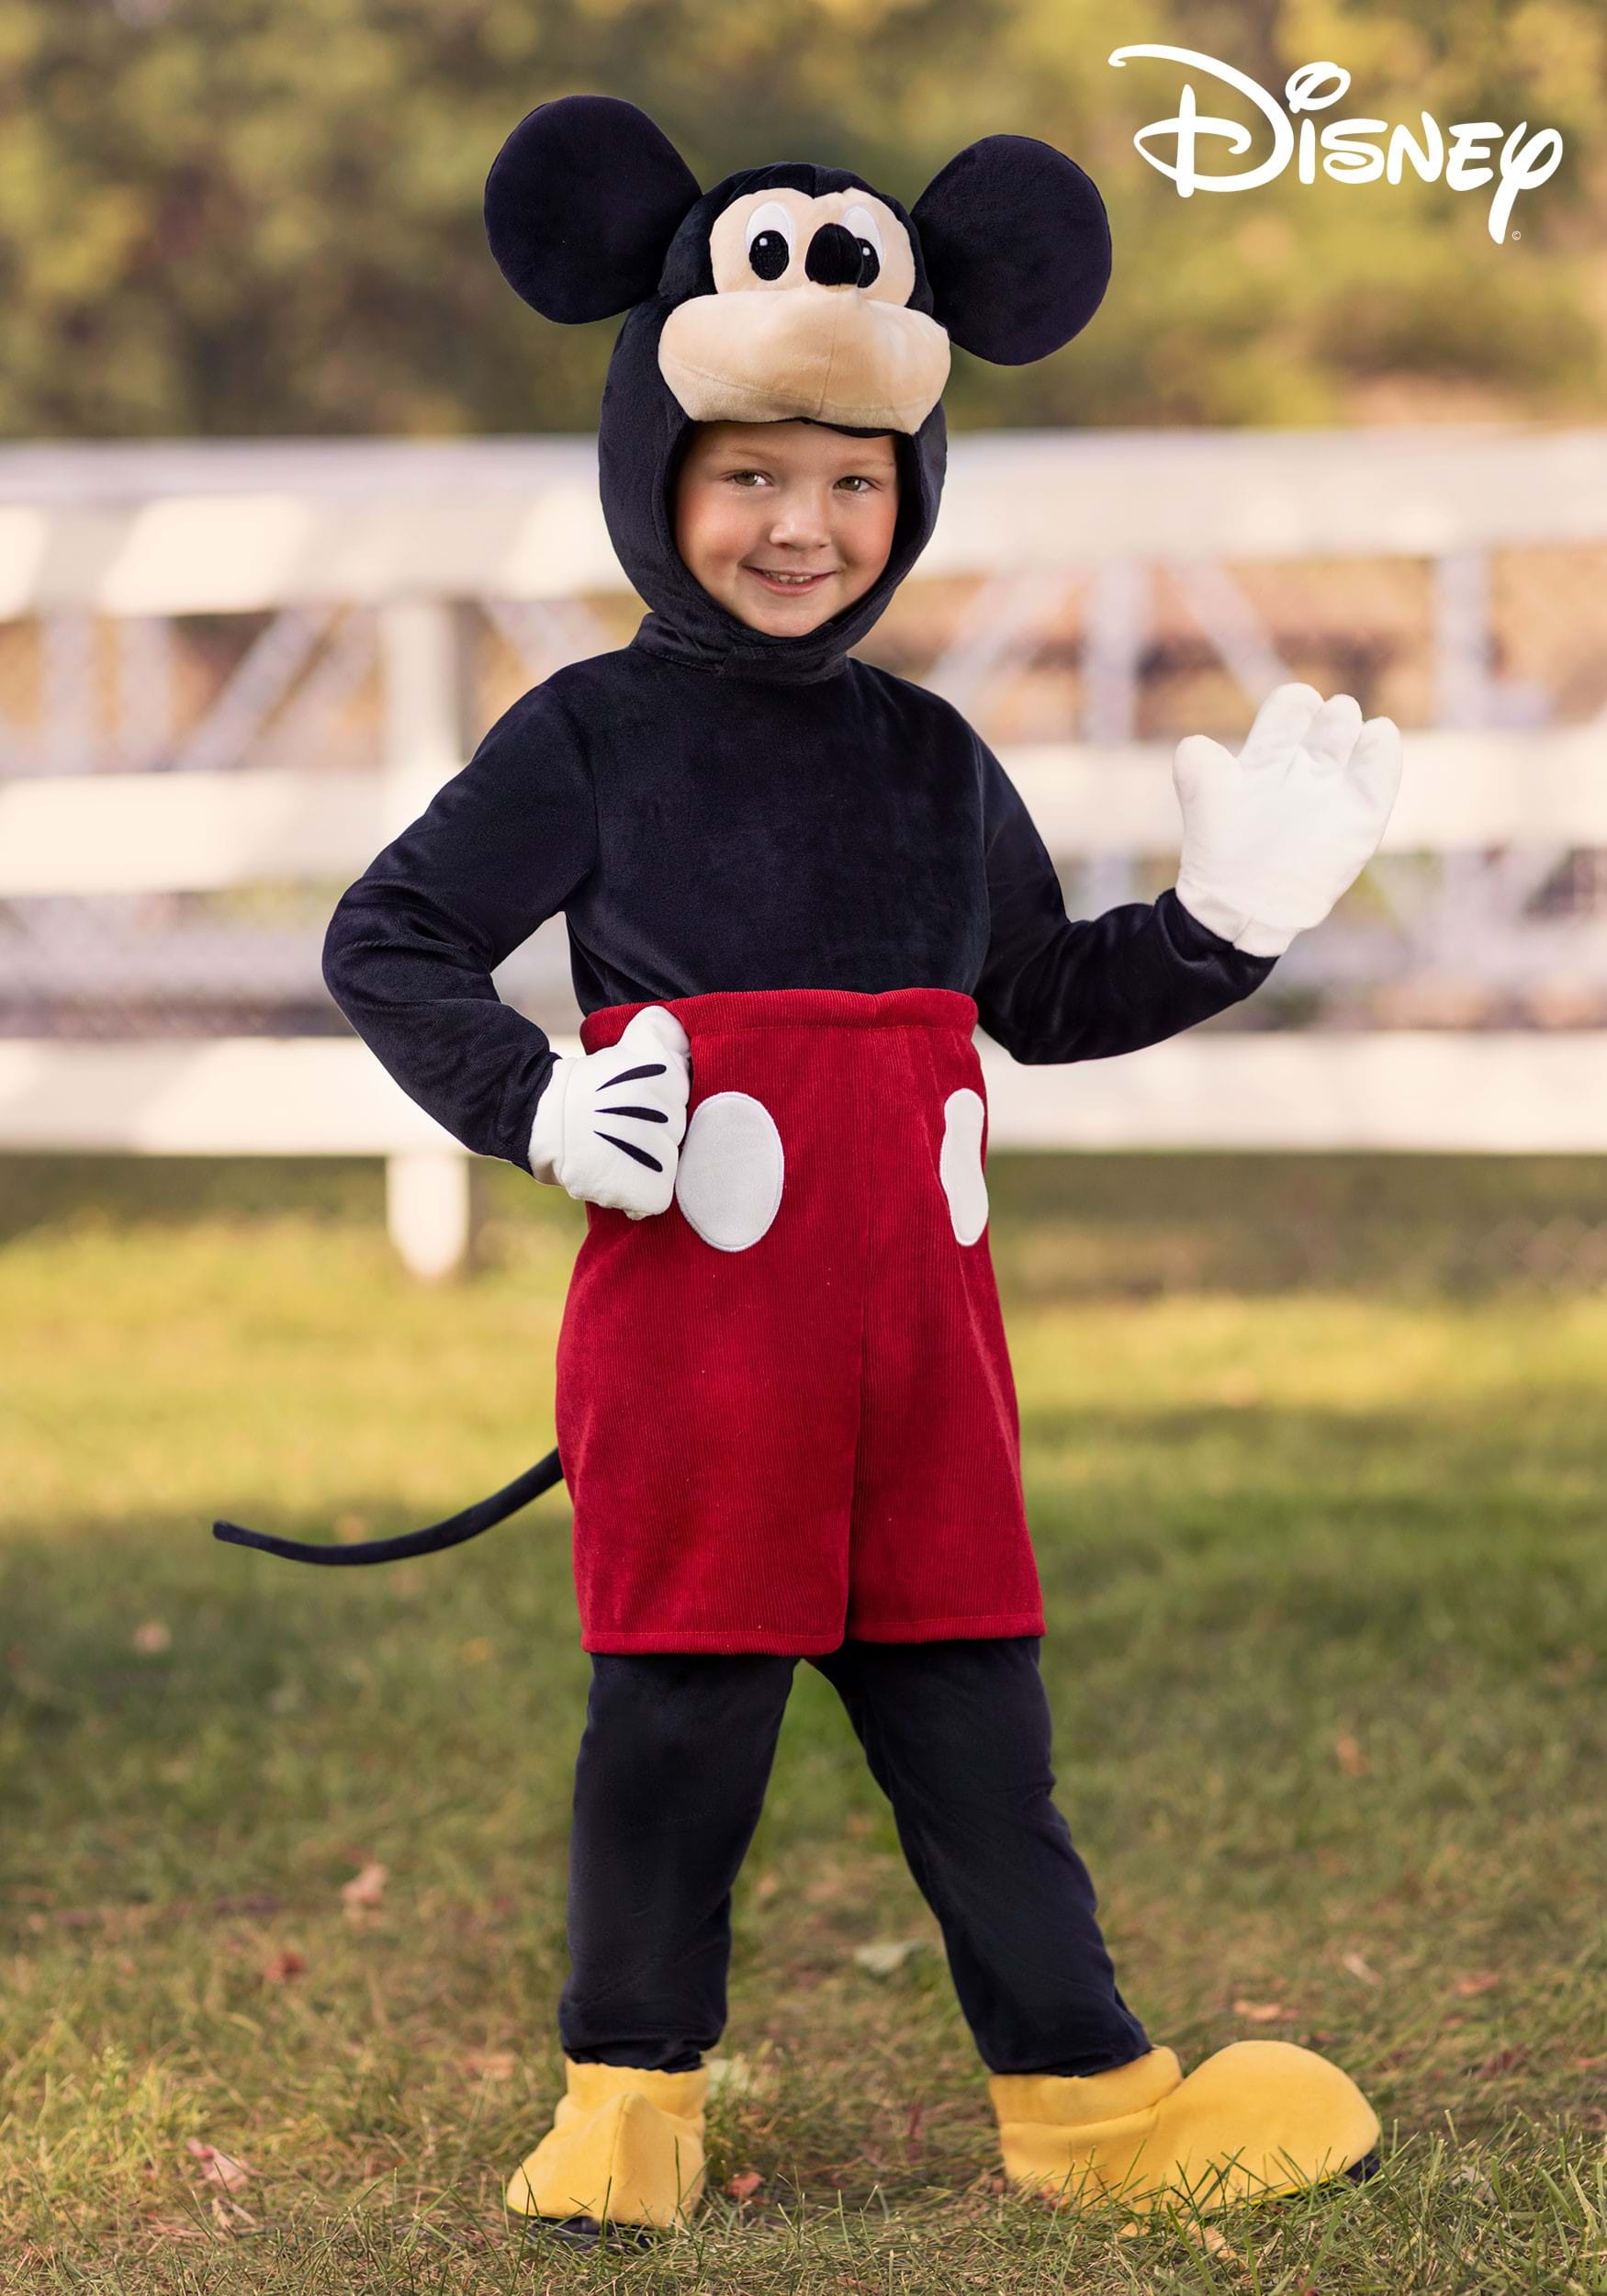 https://images.halloweencostumes.com/products/75336/1-1/toddler-snuggly-mickey-mouse-costume.jpg